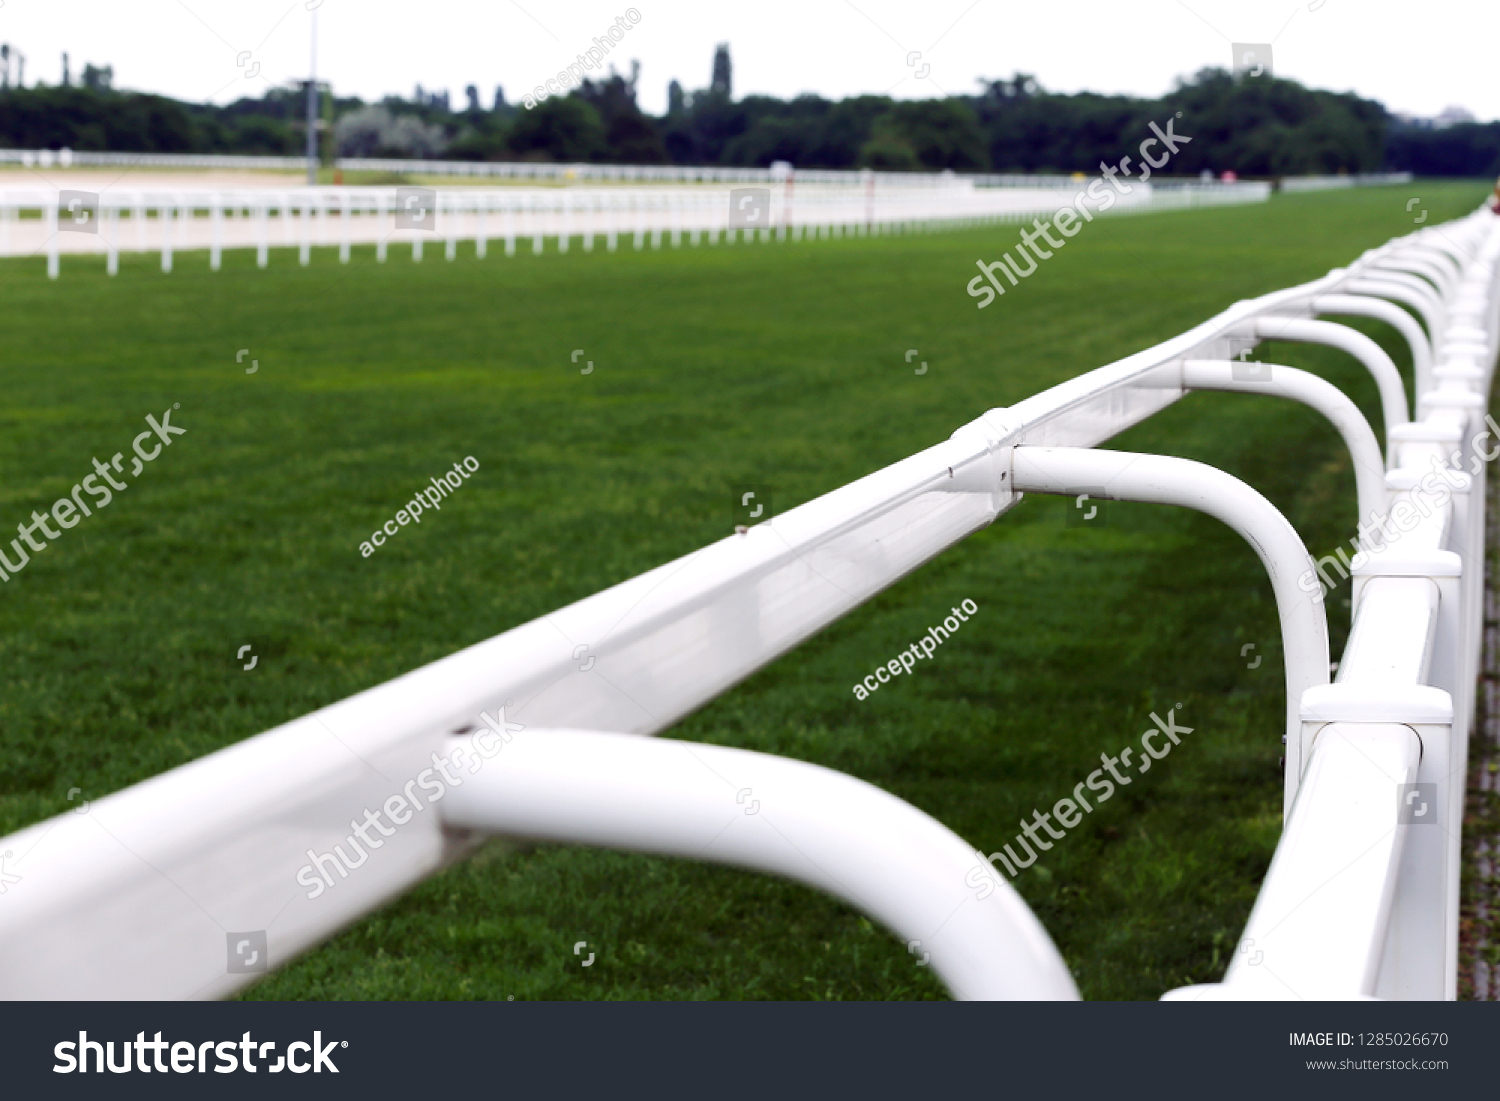 Treated green grass ready for gallop racing on the racing weekend
 #1285026670